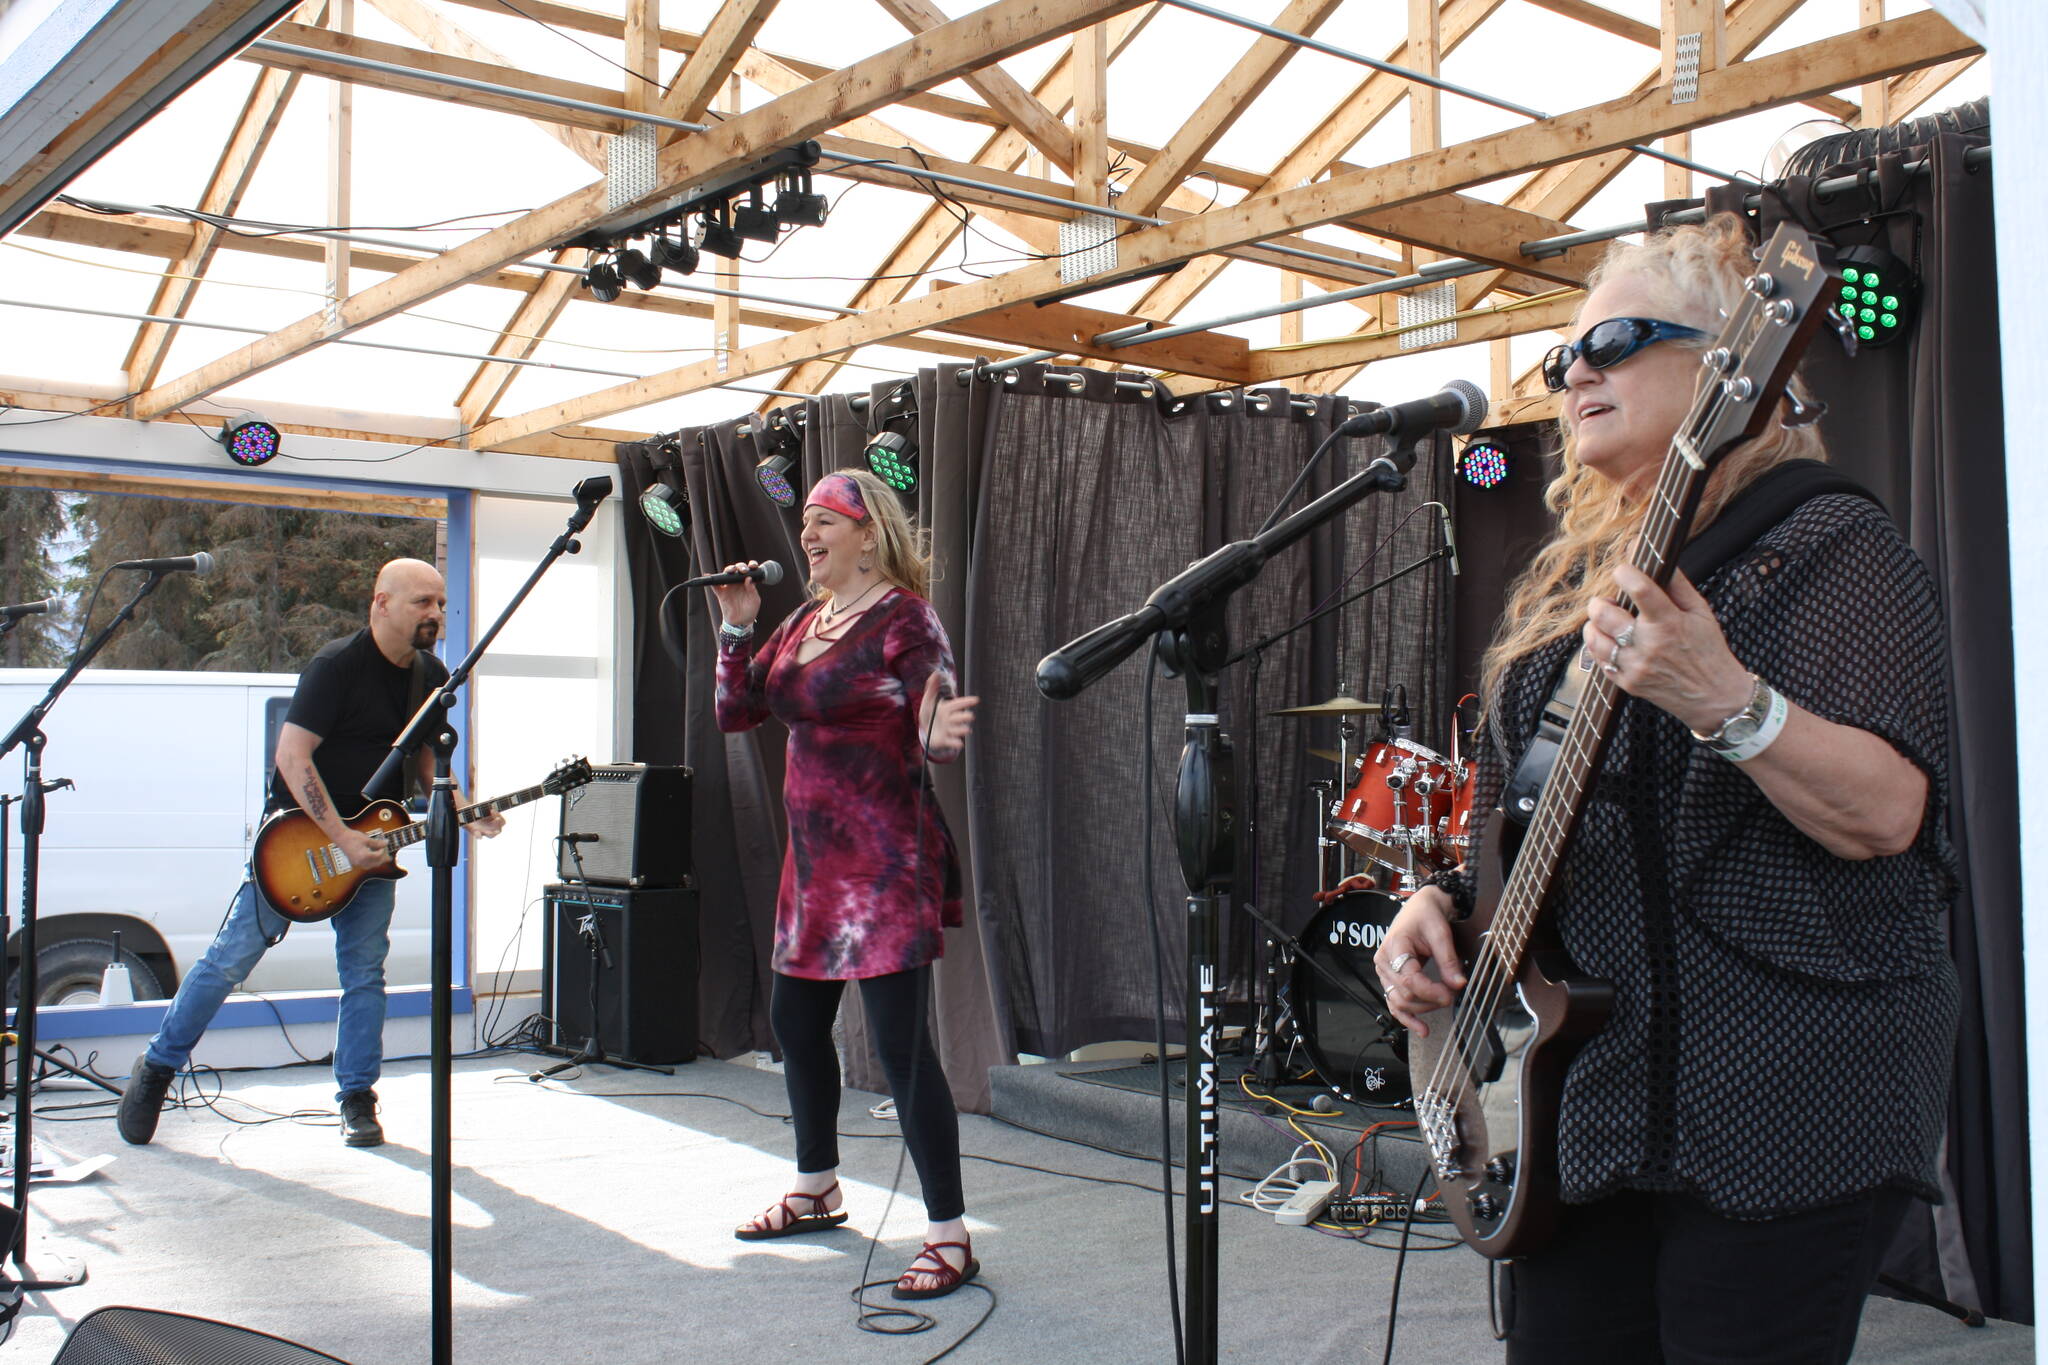 Danger Money plays at the Rock’N the Ranch at the Rusty Ravin Music Festival in Kenai, Alaska, on Friday, July 8, 2022. (Camille Botello/Peninsula Clarion)